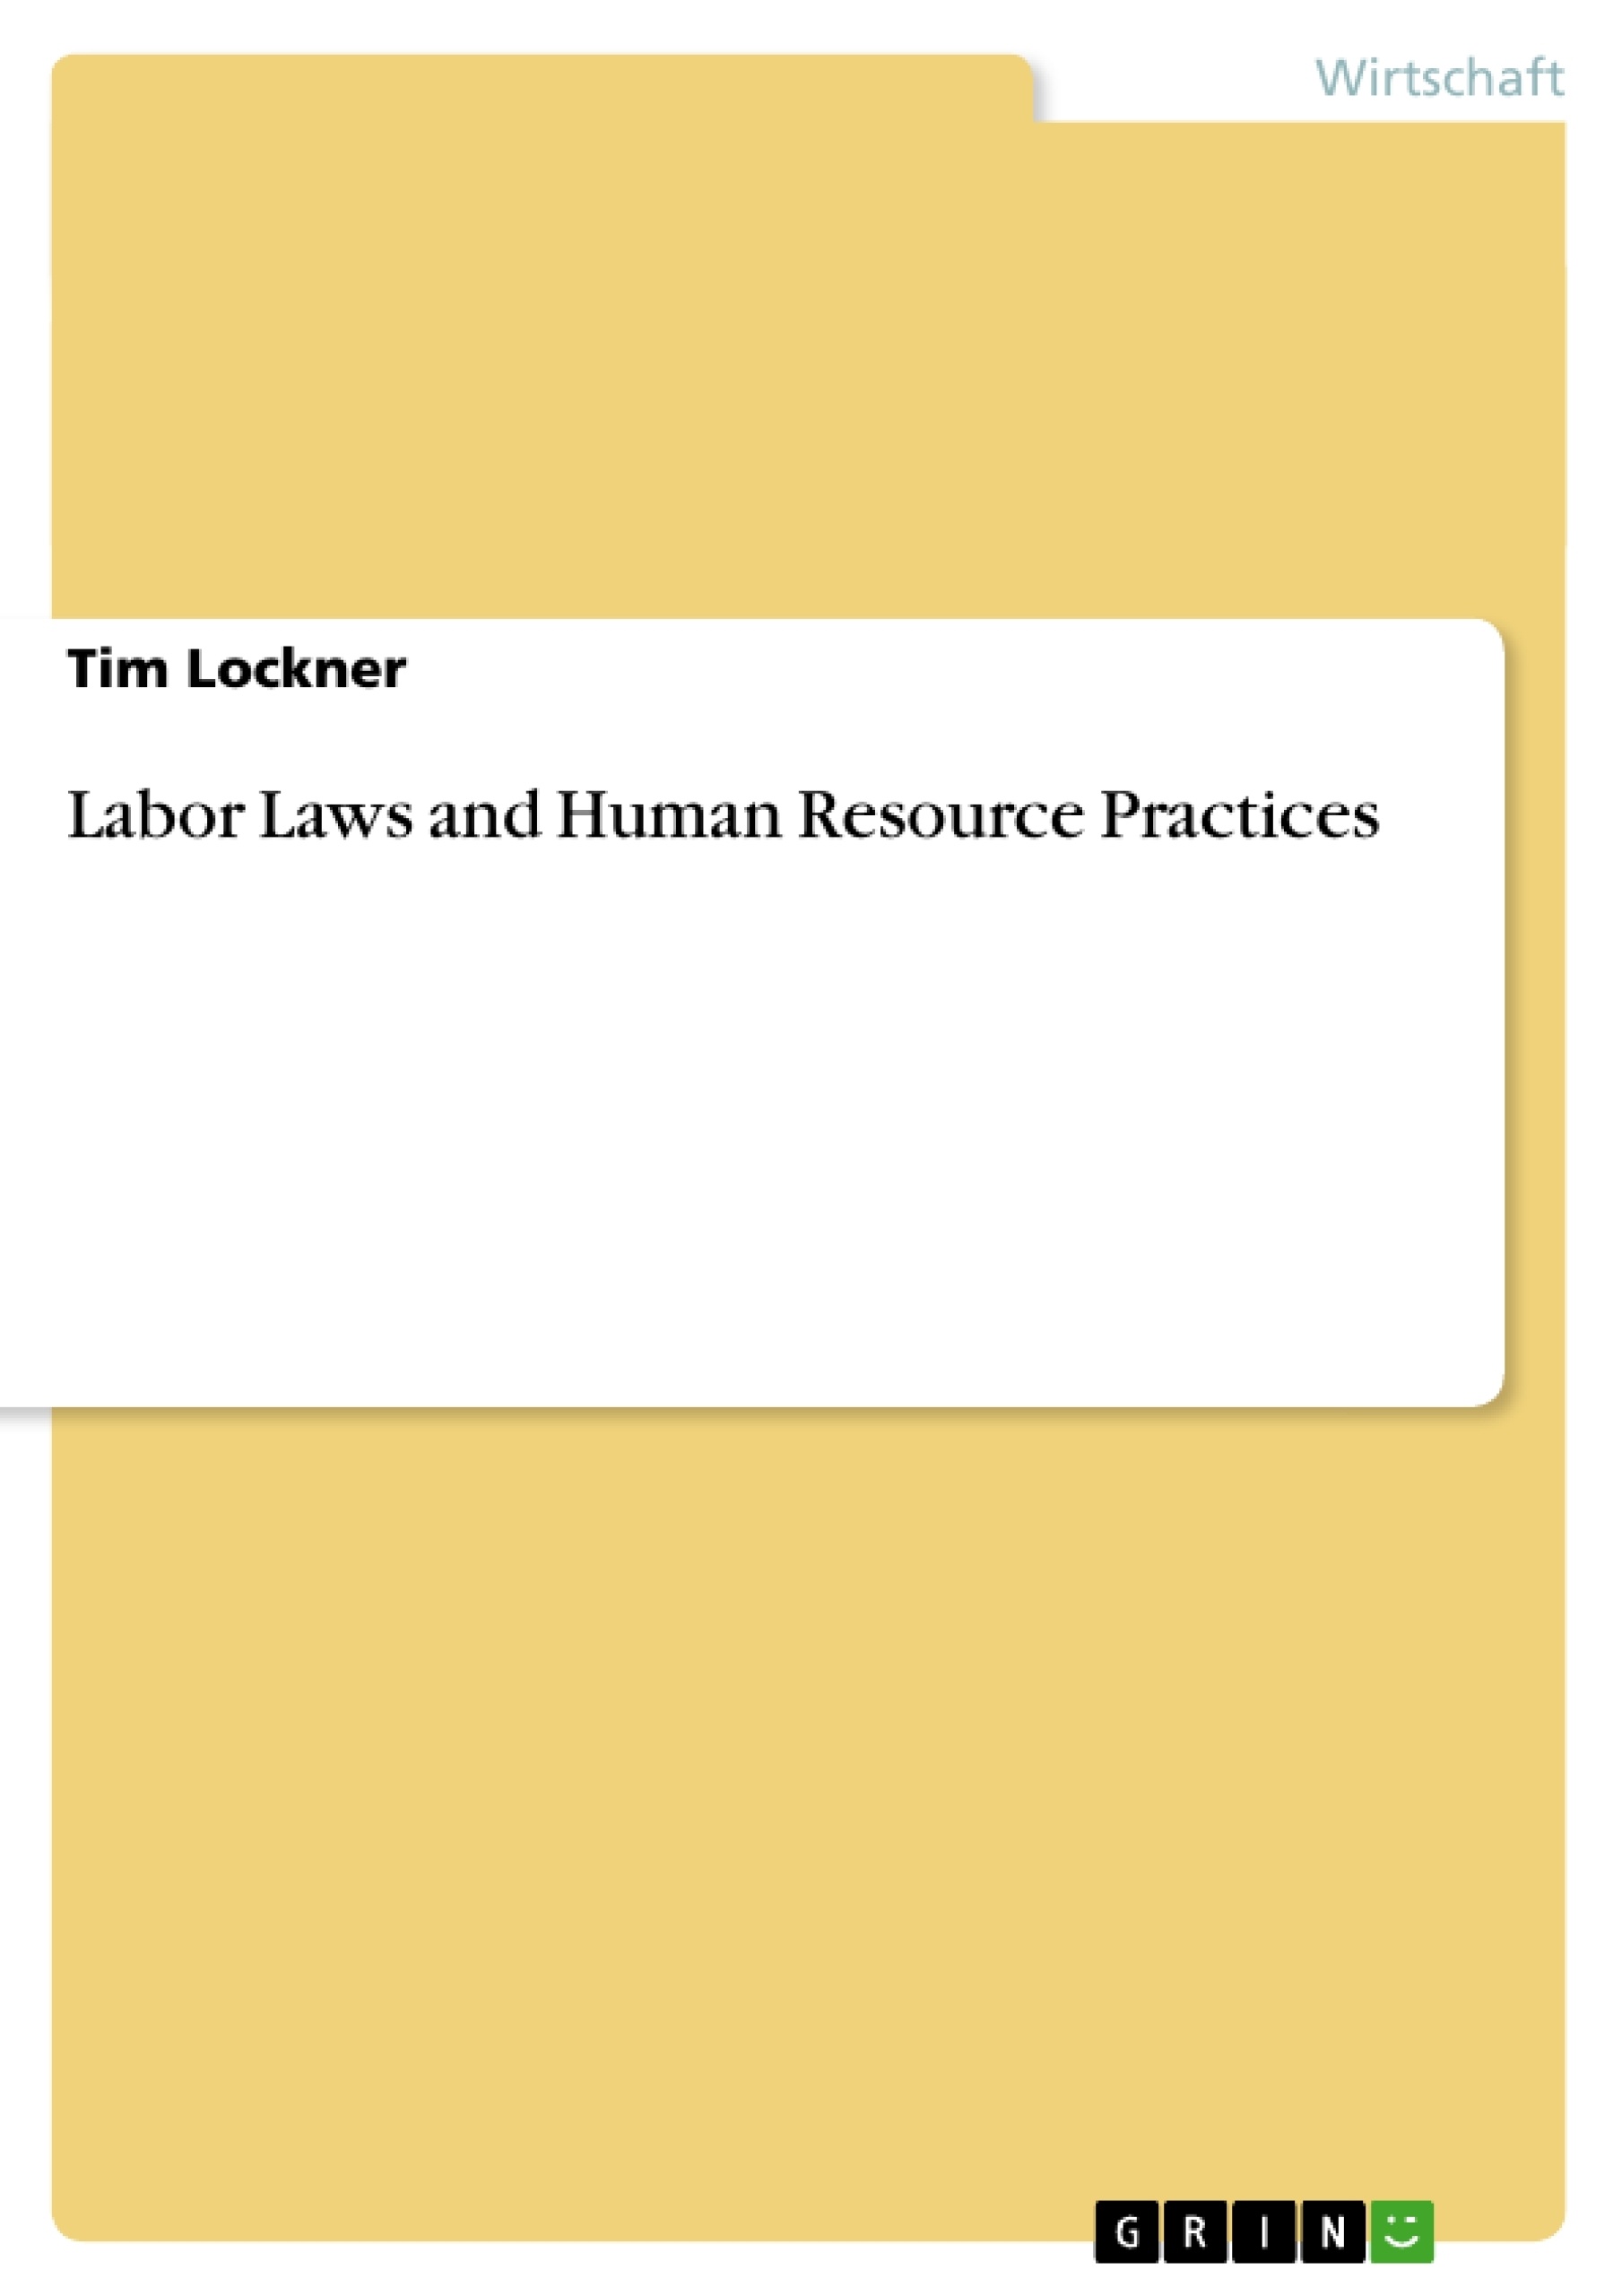 Titel: Labor Laws and Human Resource Practices